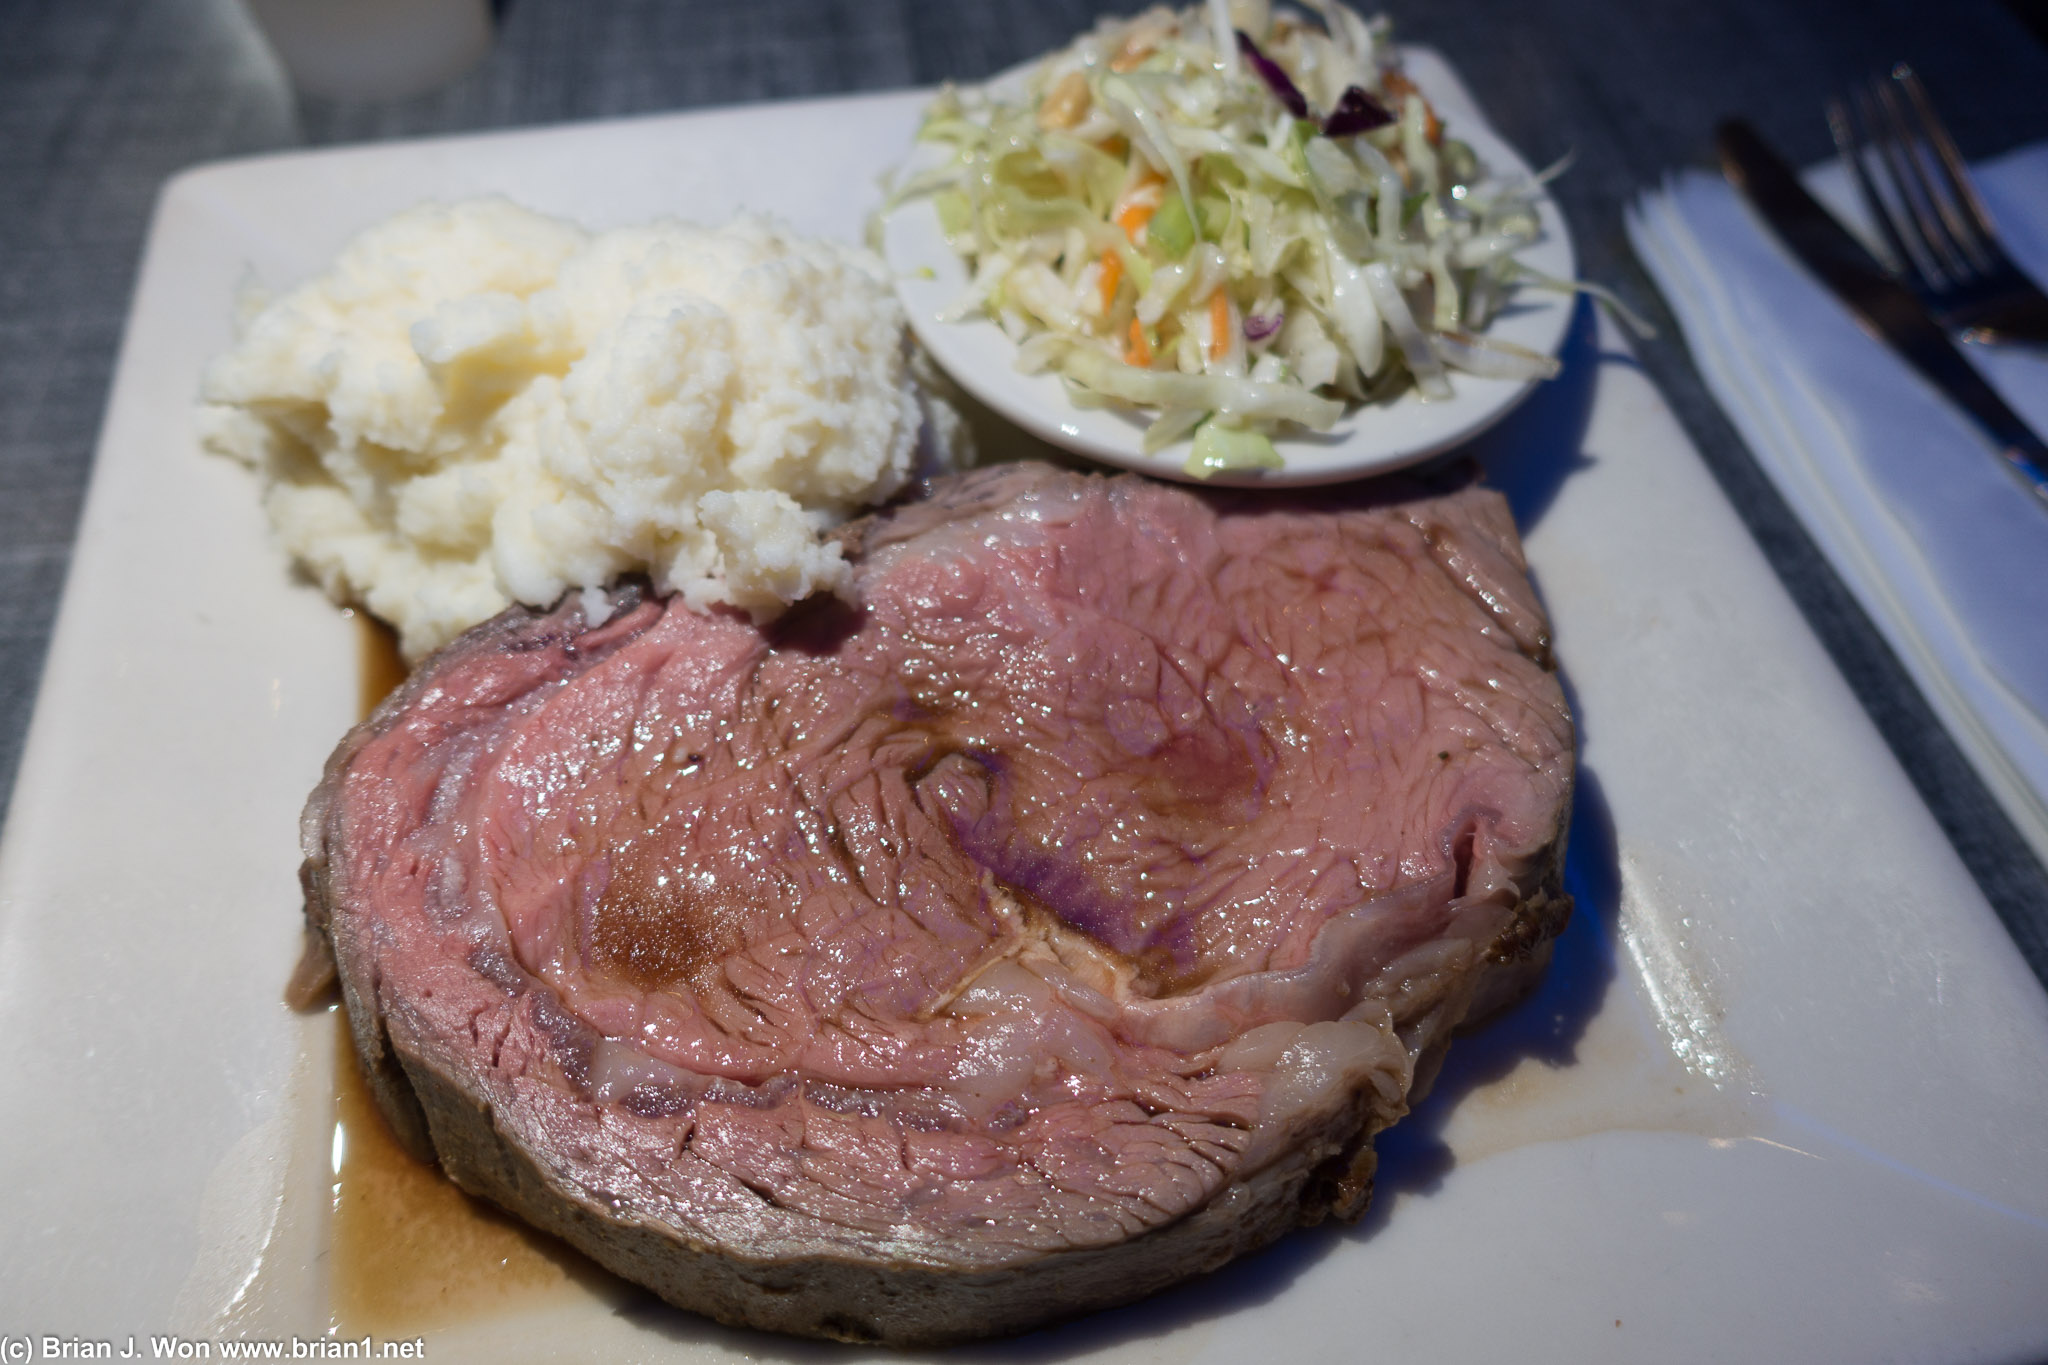 Prime rib from Lawry's Carvery.